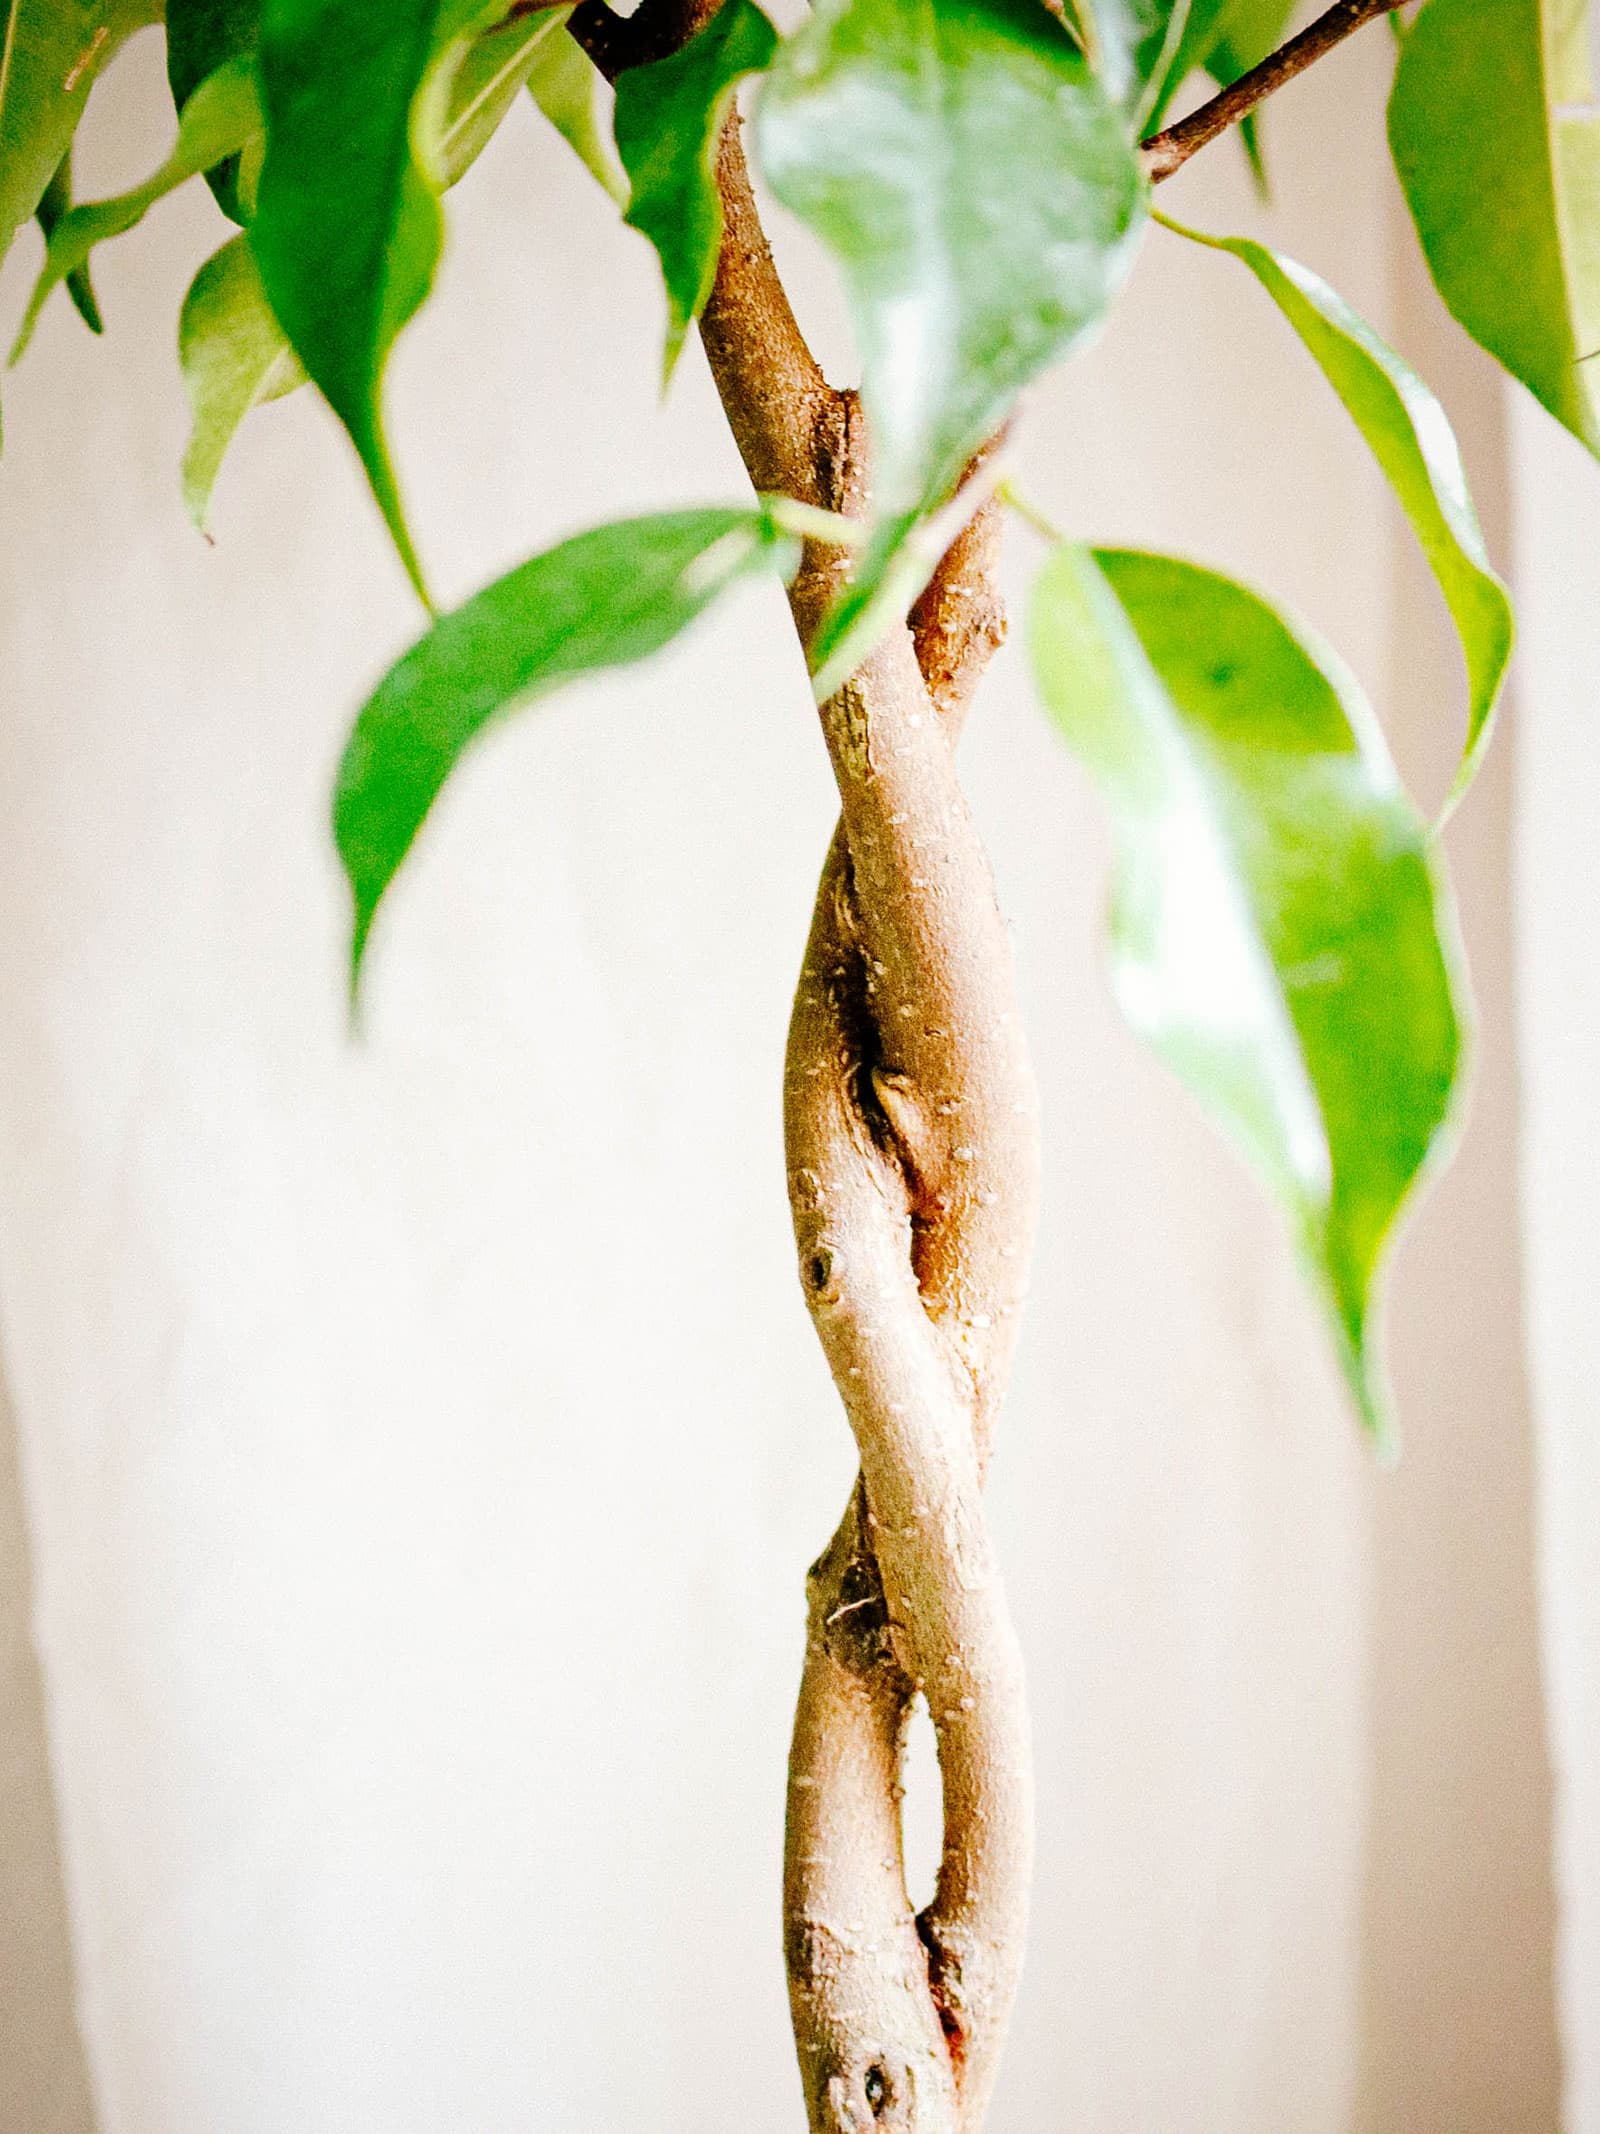 Close-up of a braided Ficus benjamina stem with a few leaves hanging down and out of focus